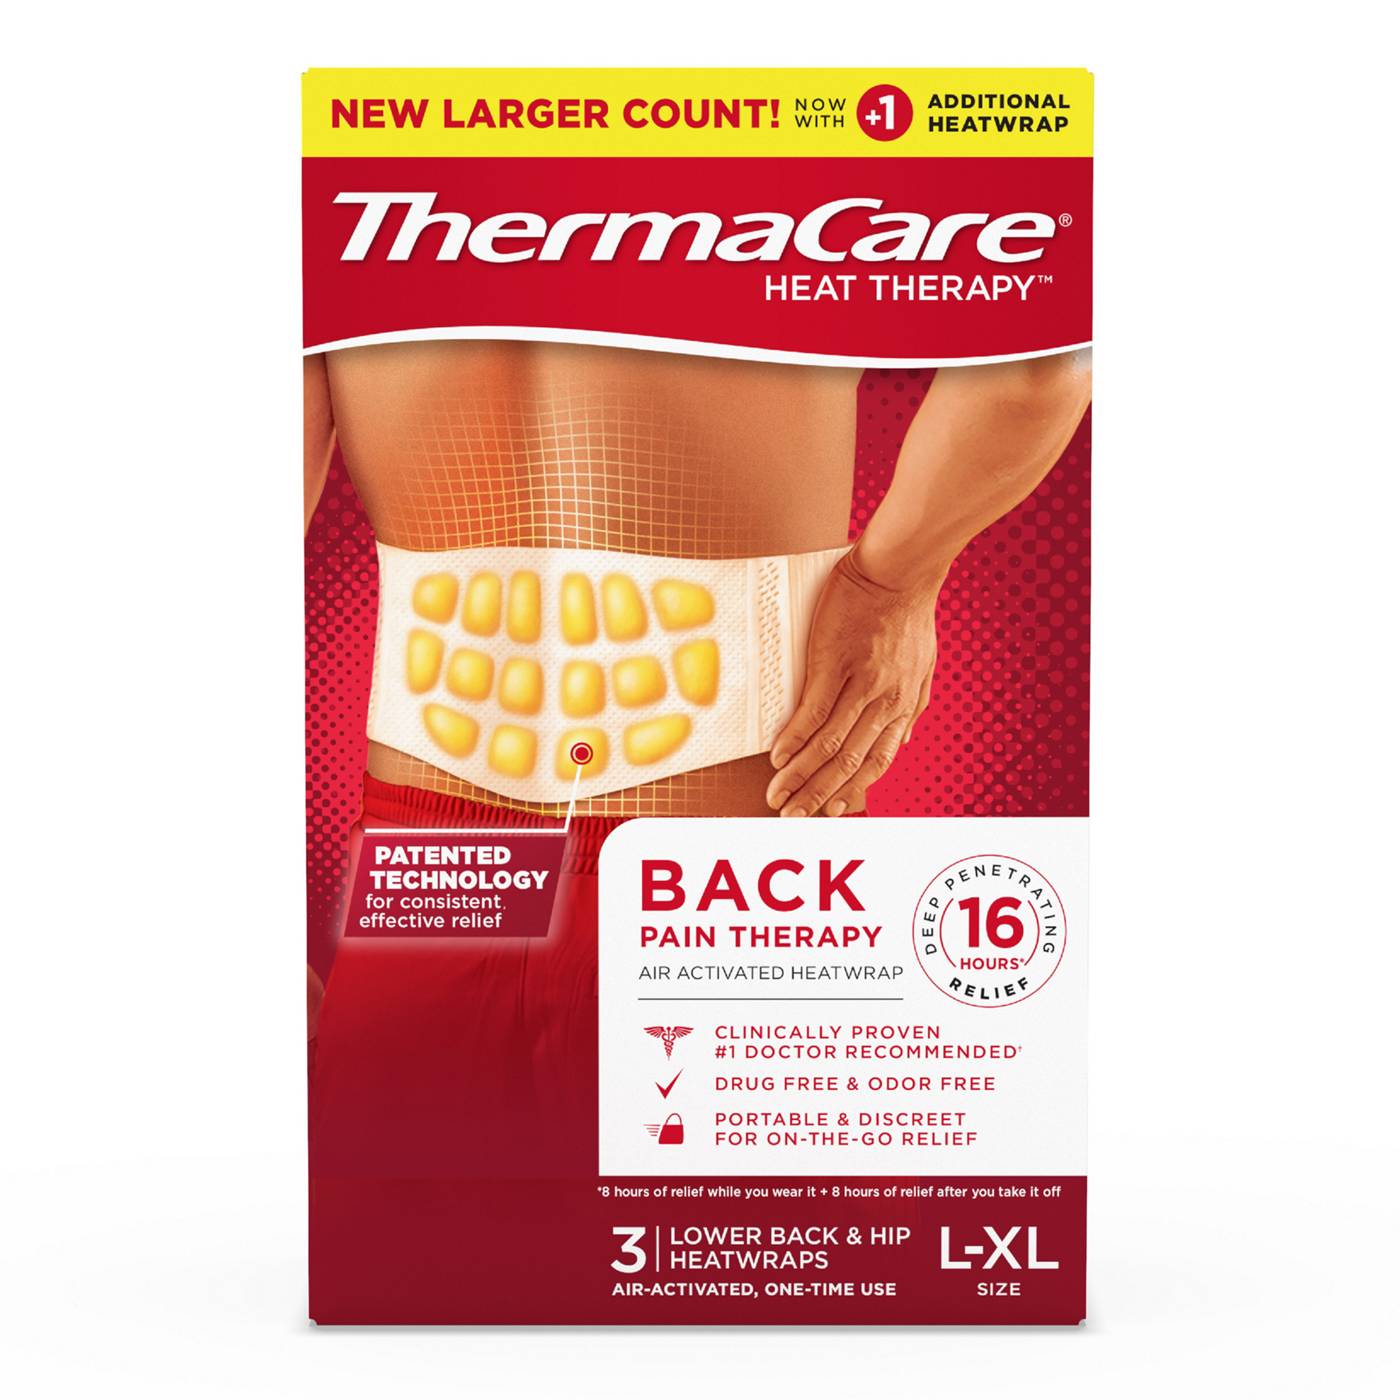 ThermaCare Back Pain Therapy Heatwraps; image 3 of 9